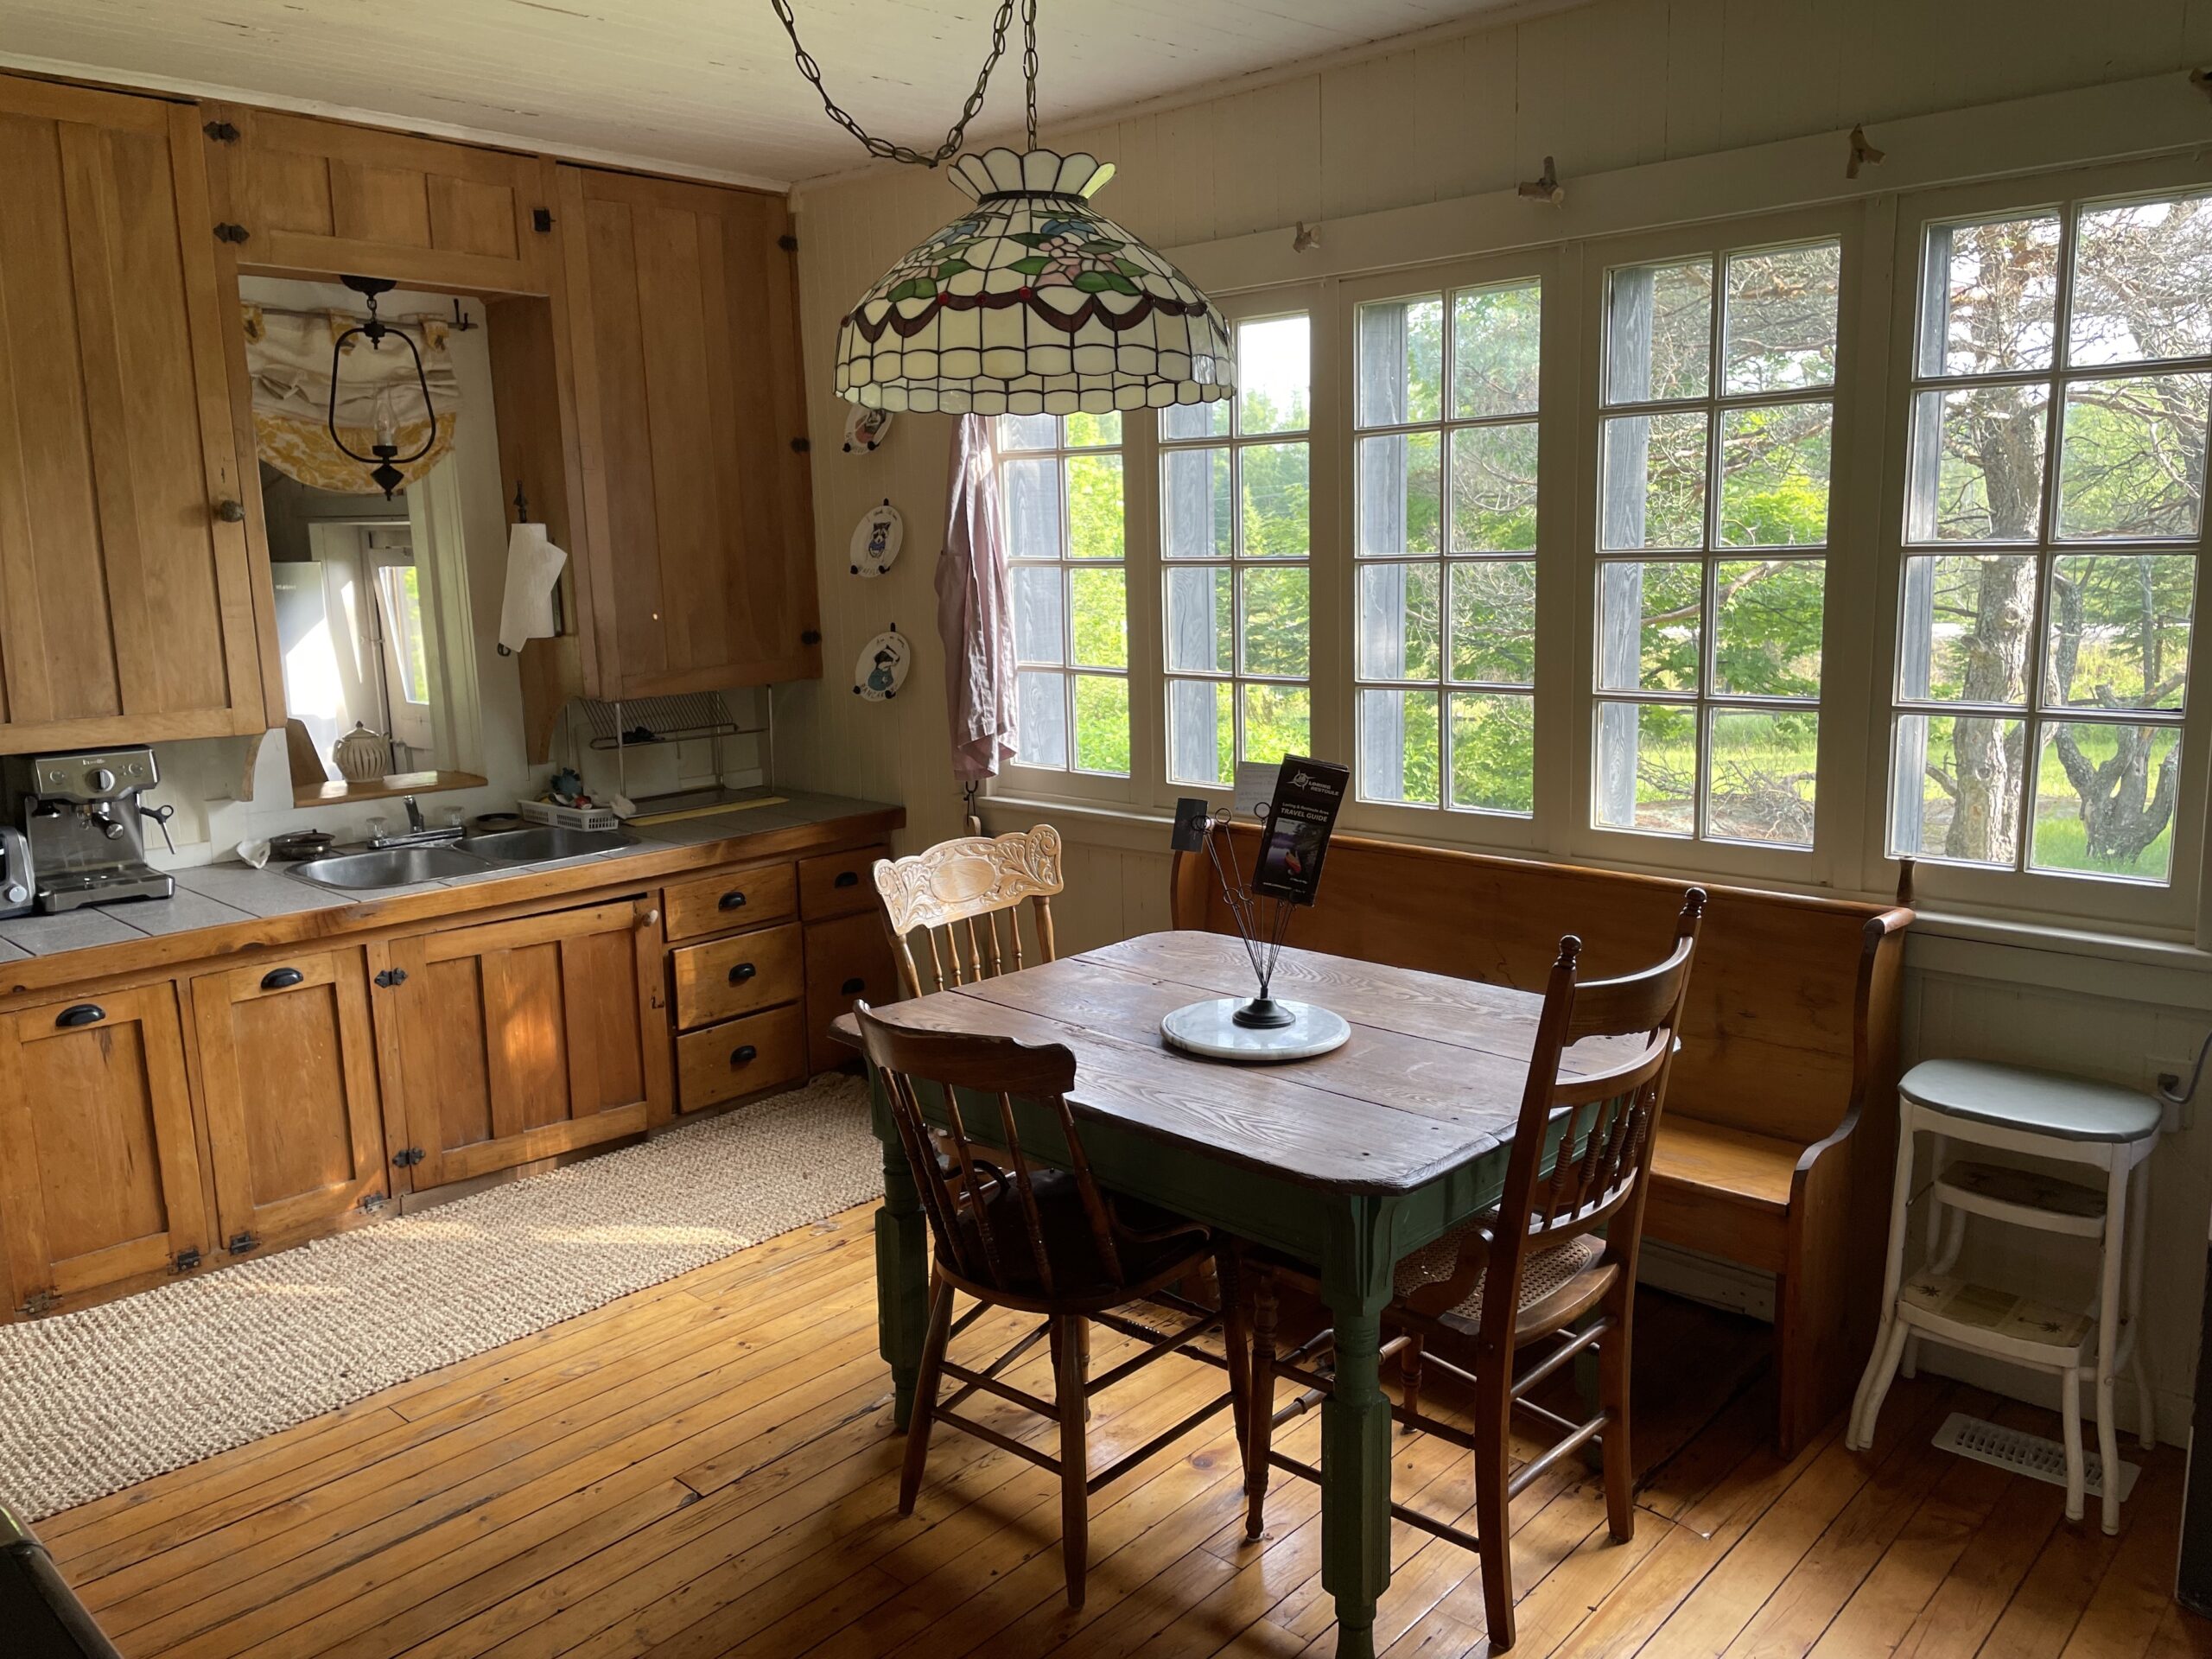 A kitchen with a small table and chairs, hardwood floors, wooden cabinets, and big windows across the exterior wall.